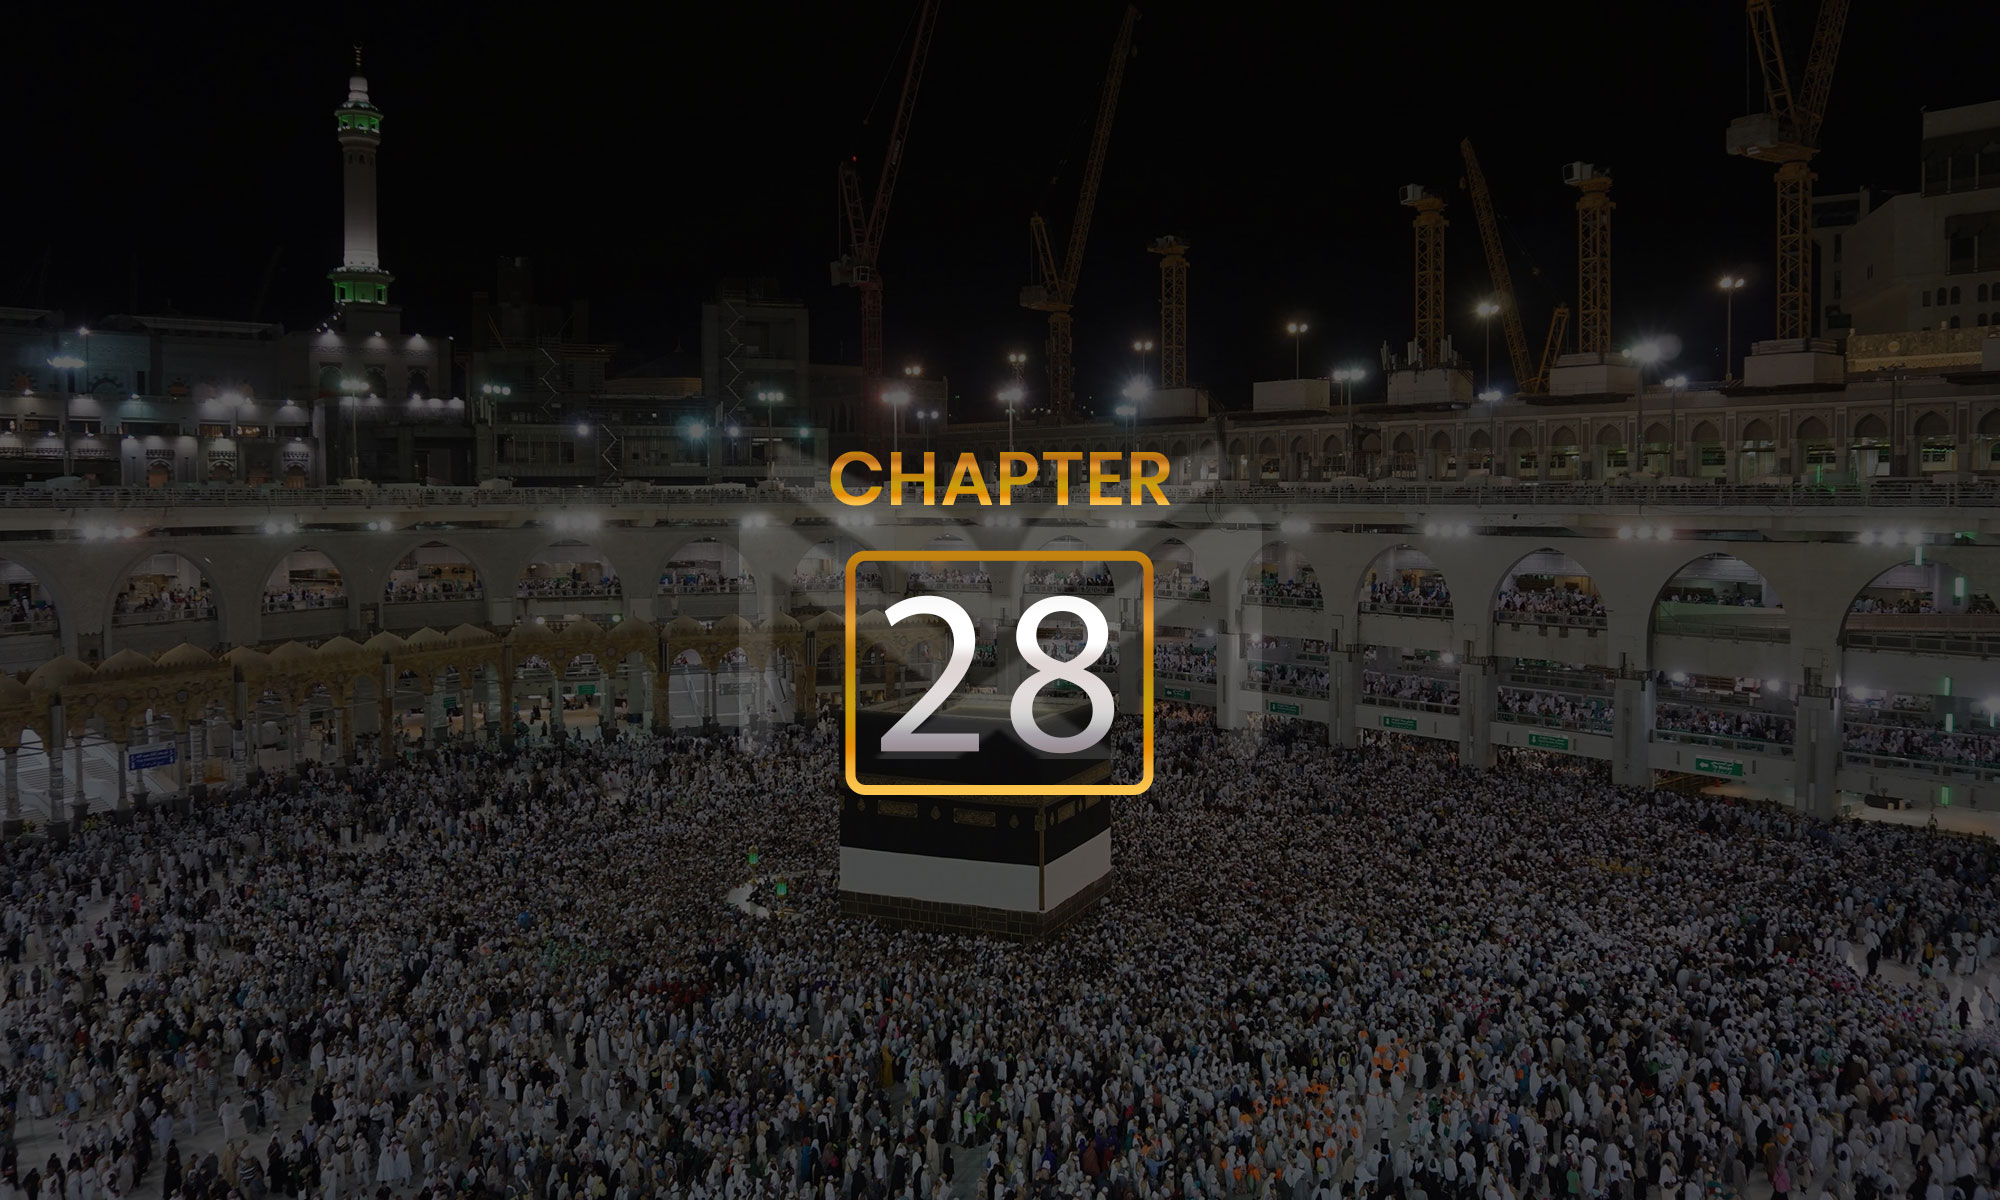 The Year of Delegations and the Hajj of Abu Bakr with the People